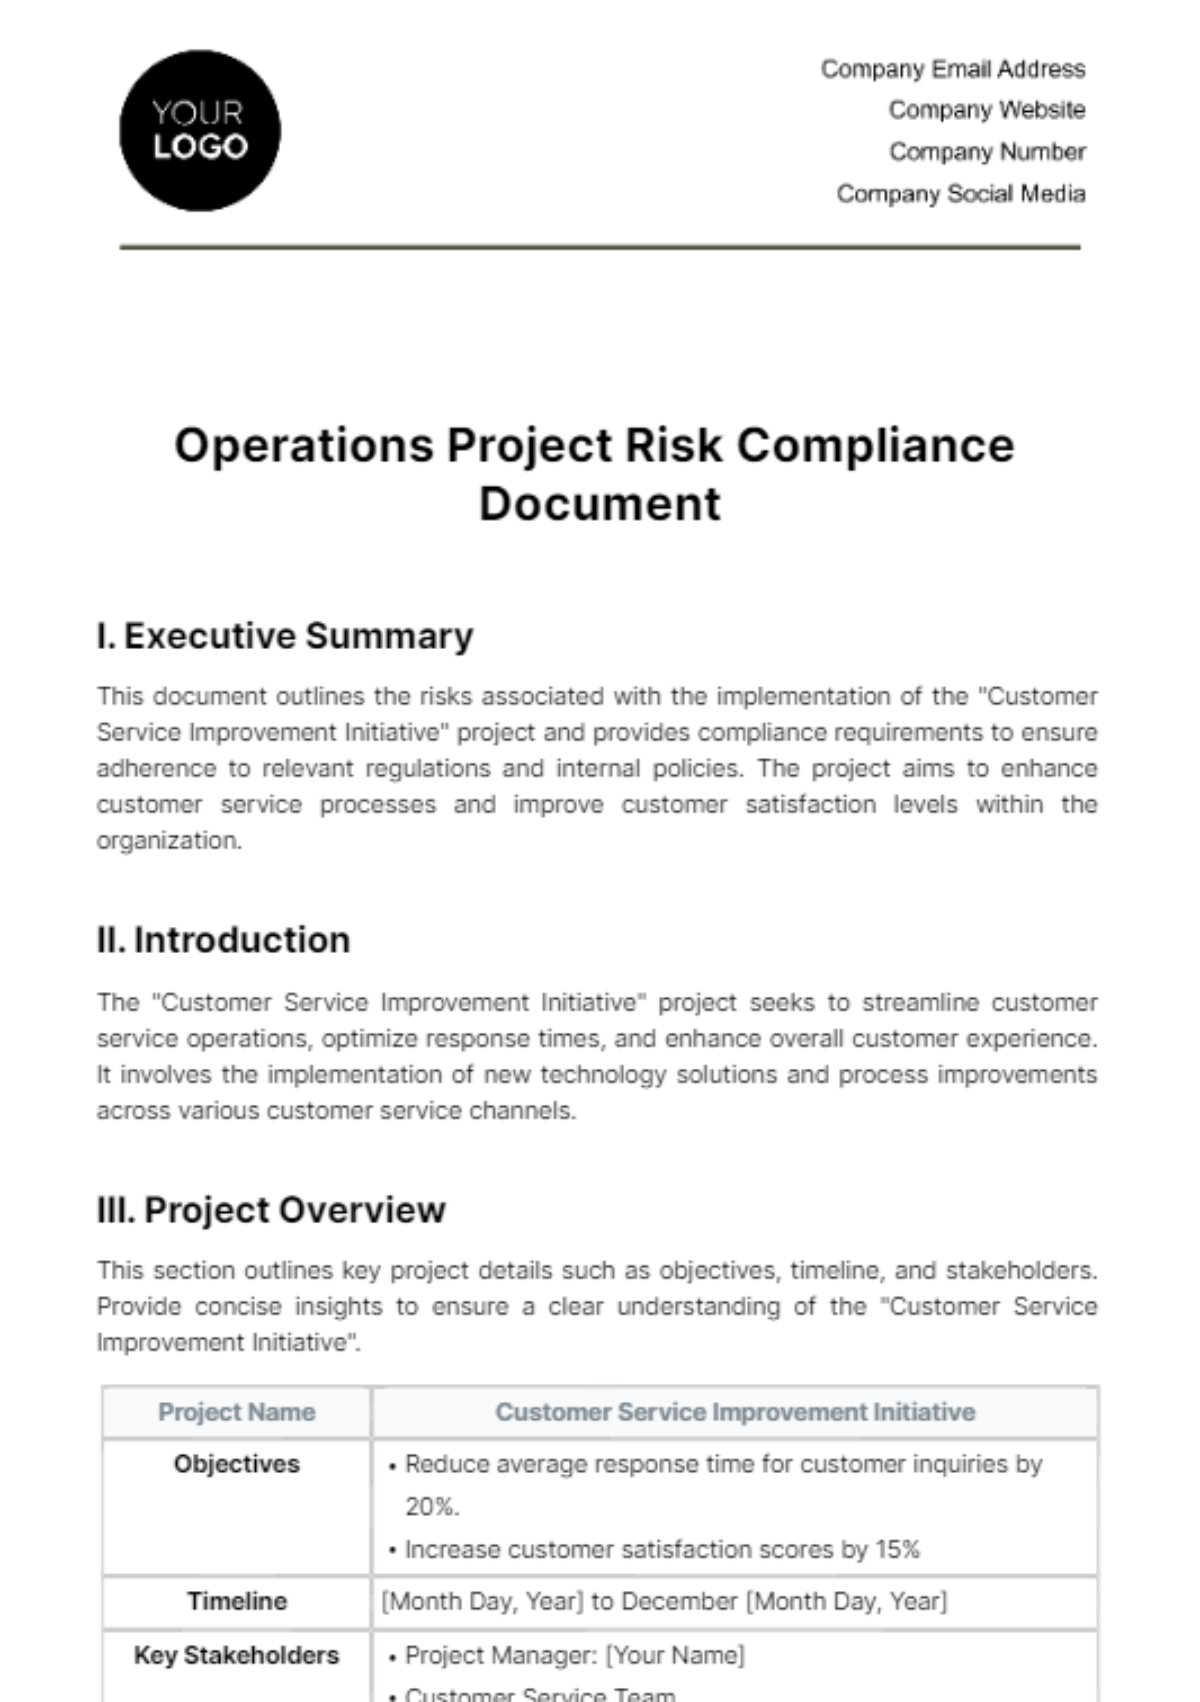 Operations Project Risk Compliance Document Template